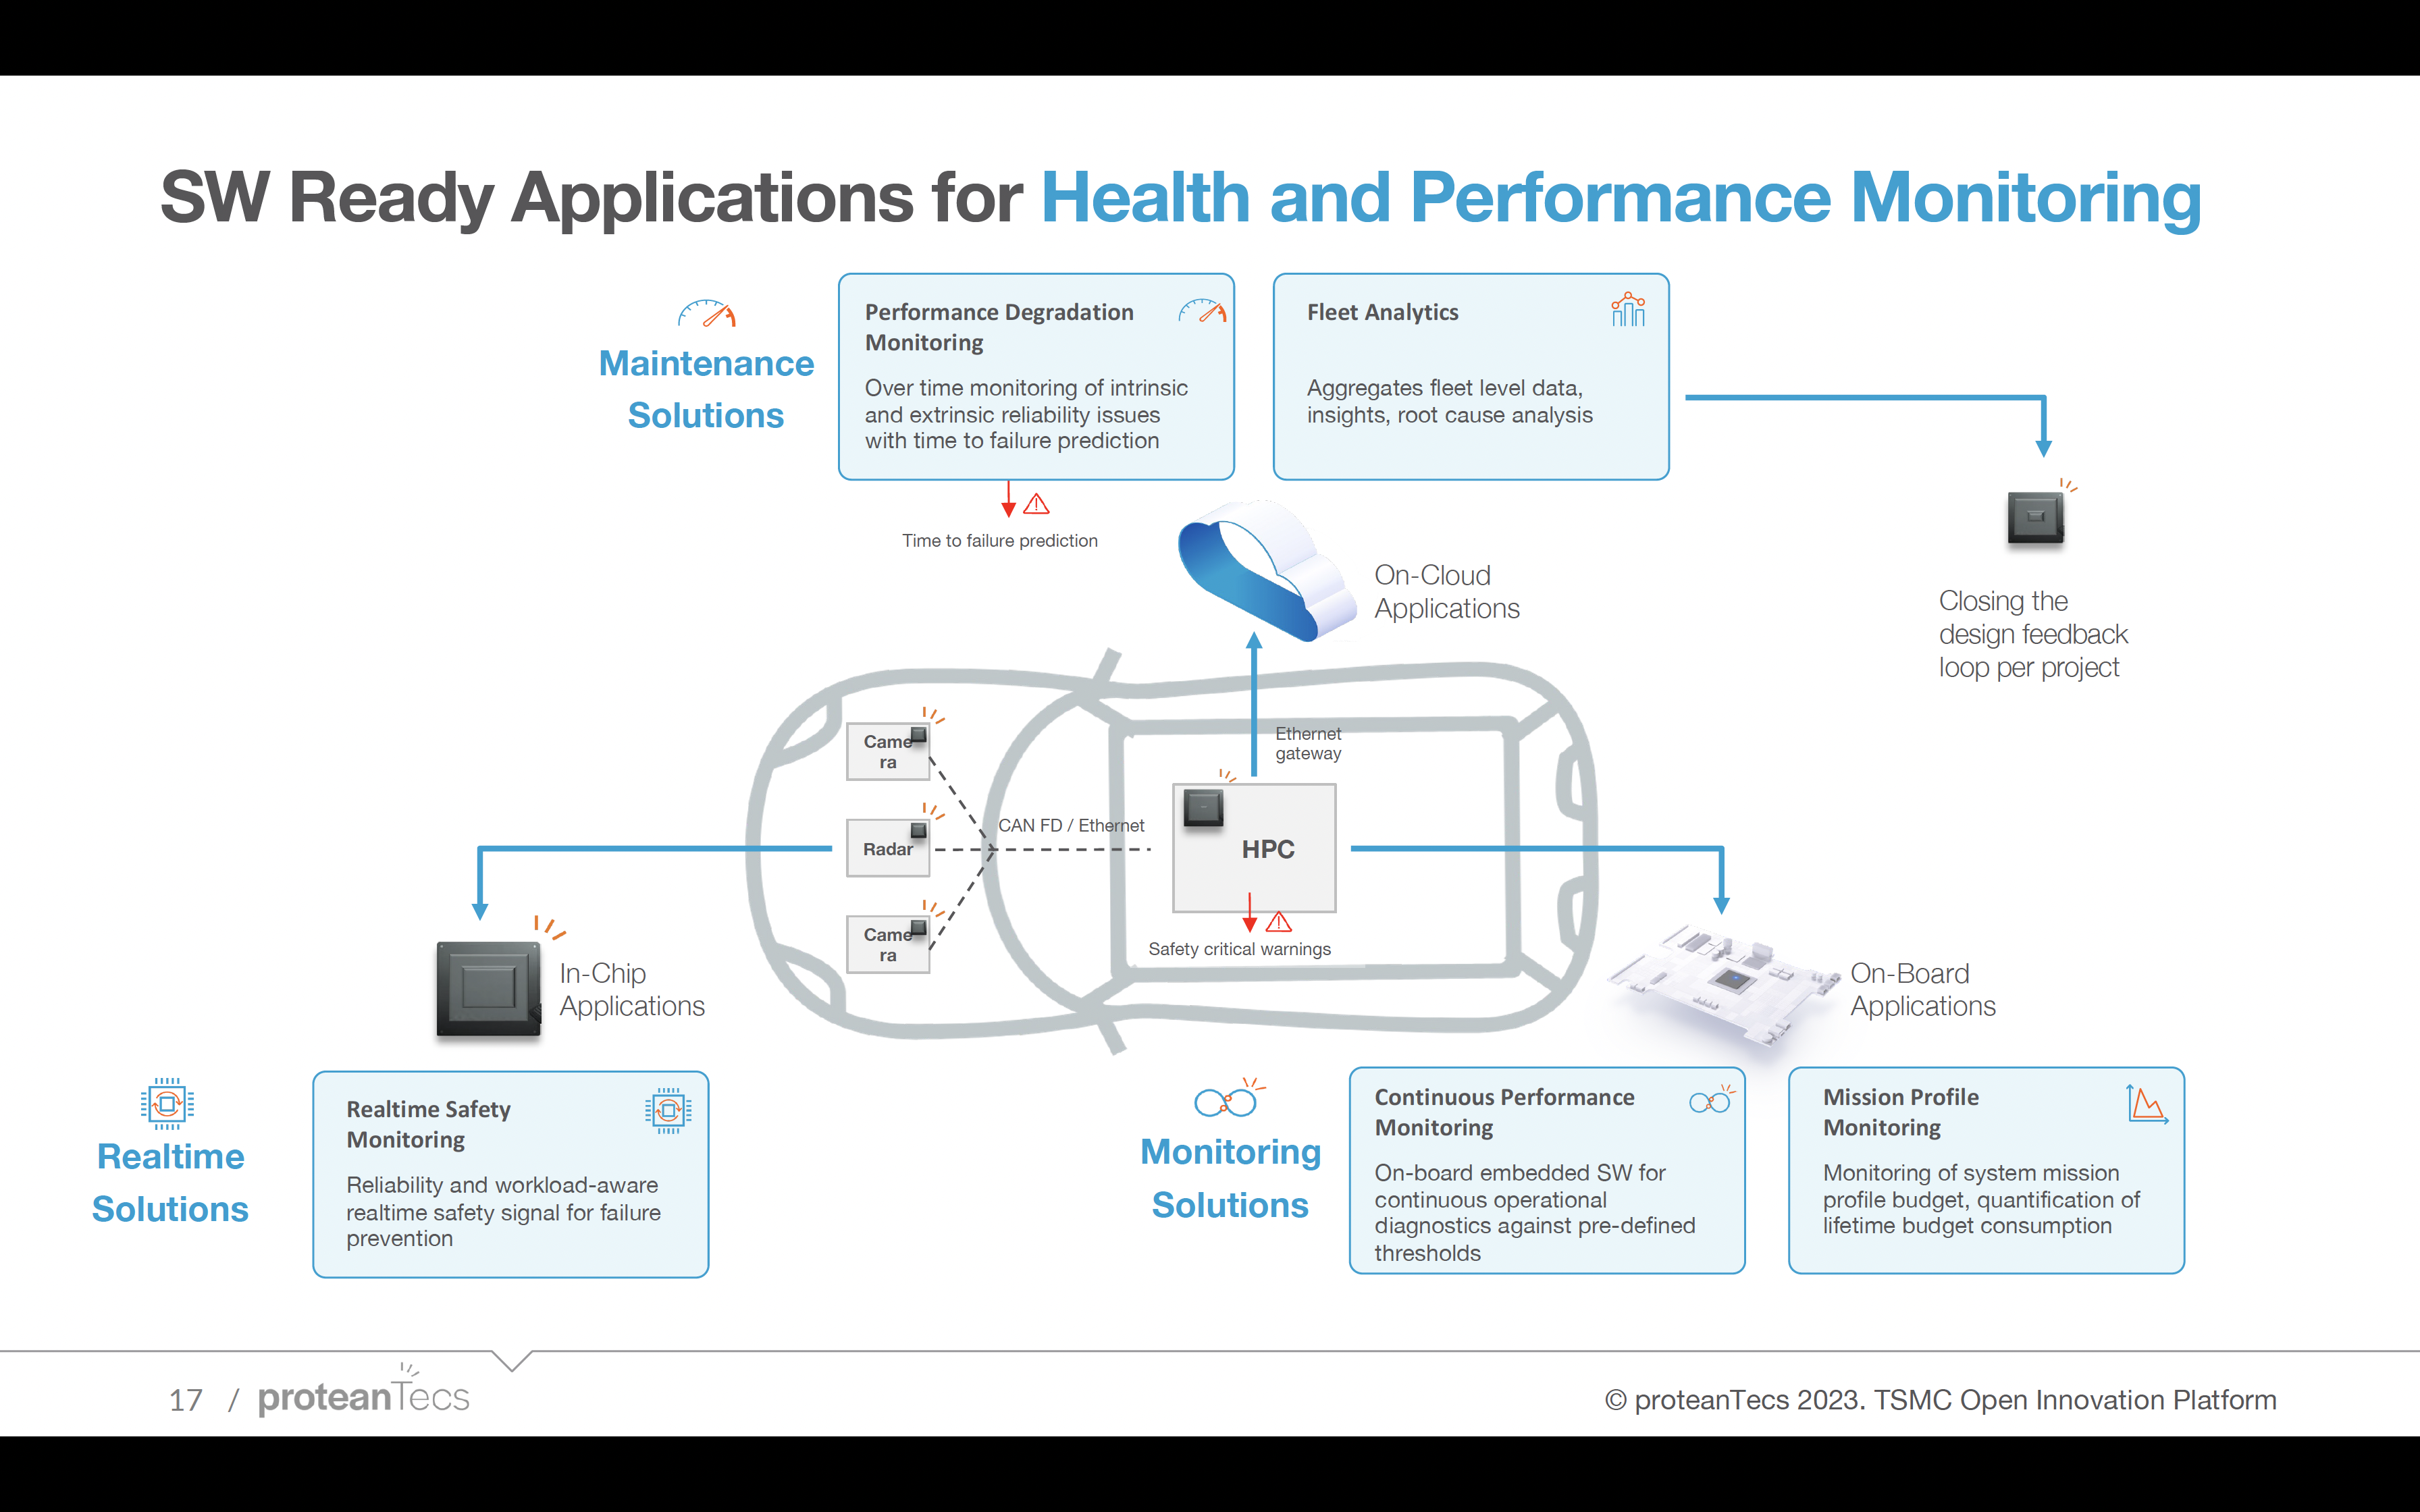 SW Ready Applications for Health and Performance Monitoring